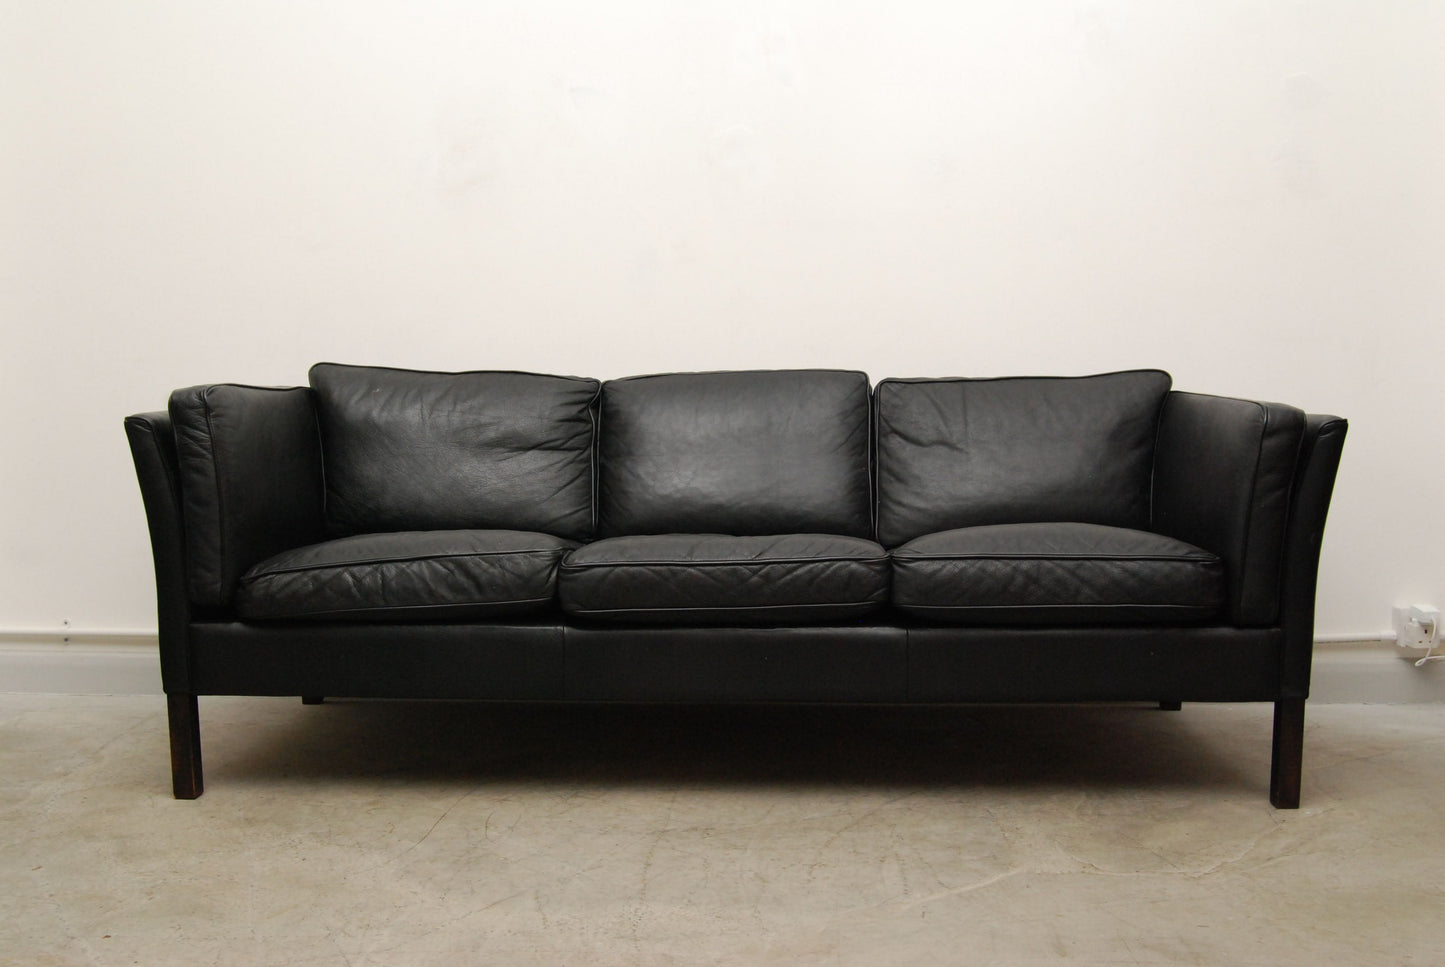 Three seat sofa by Stouby (black)